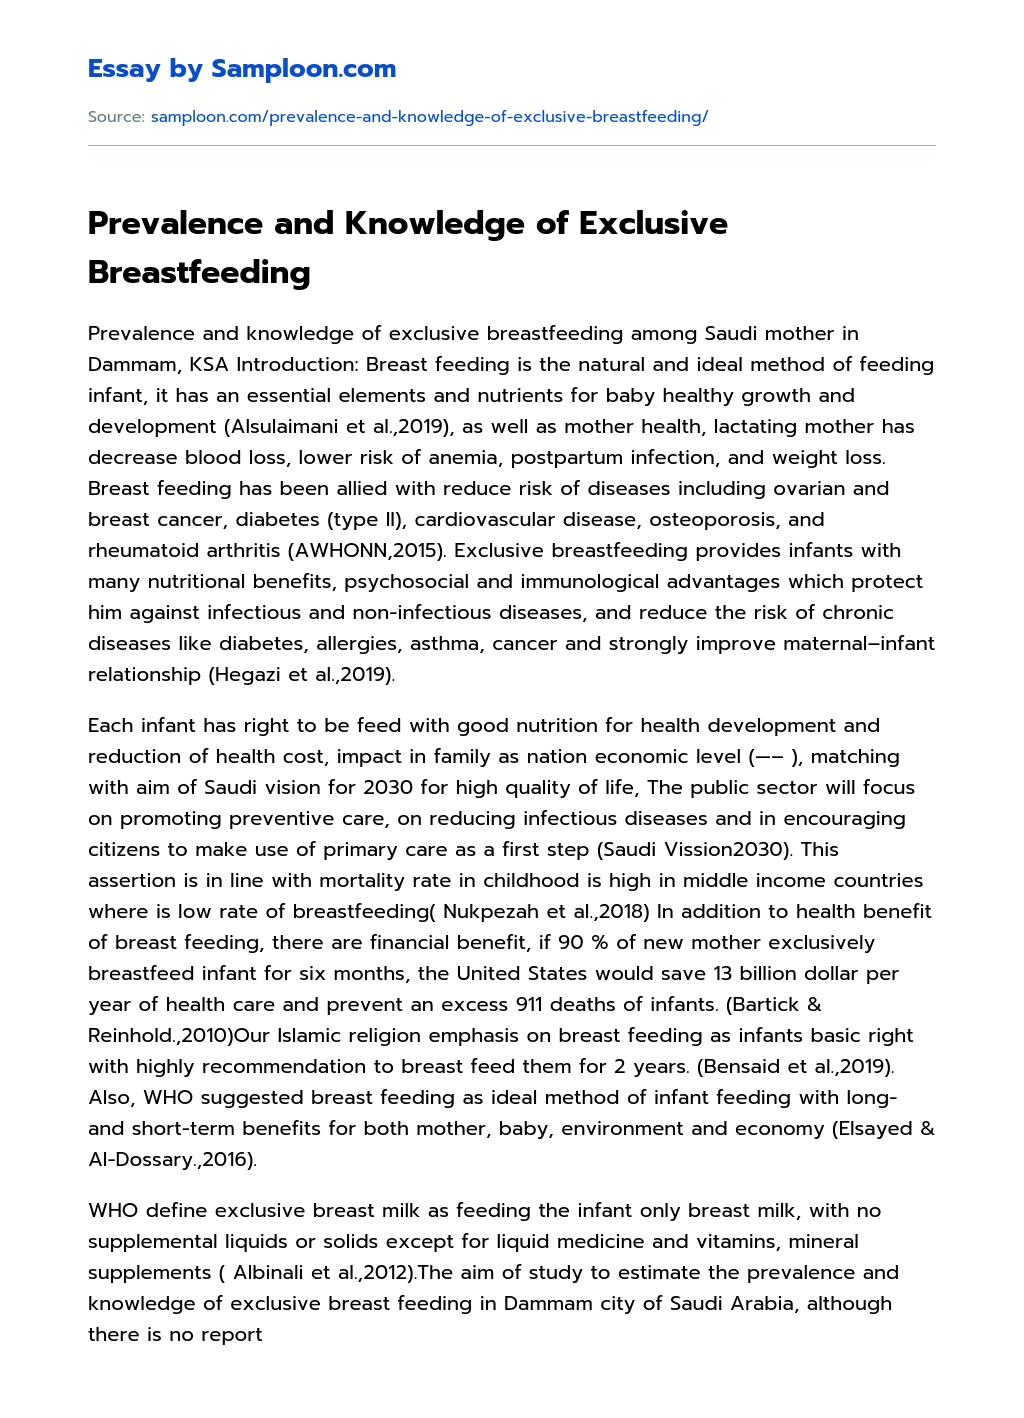 Prevalence and Knowledge of Exclusive Breastfeeding essay